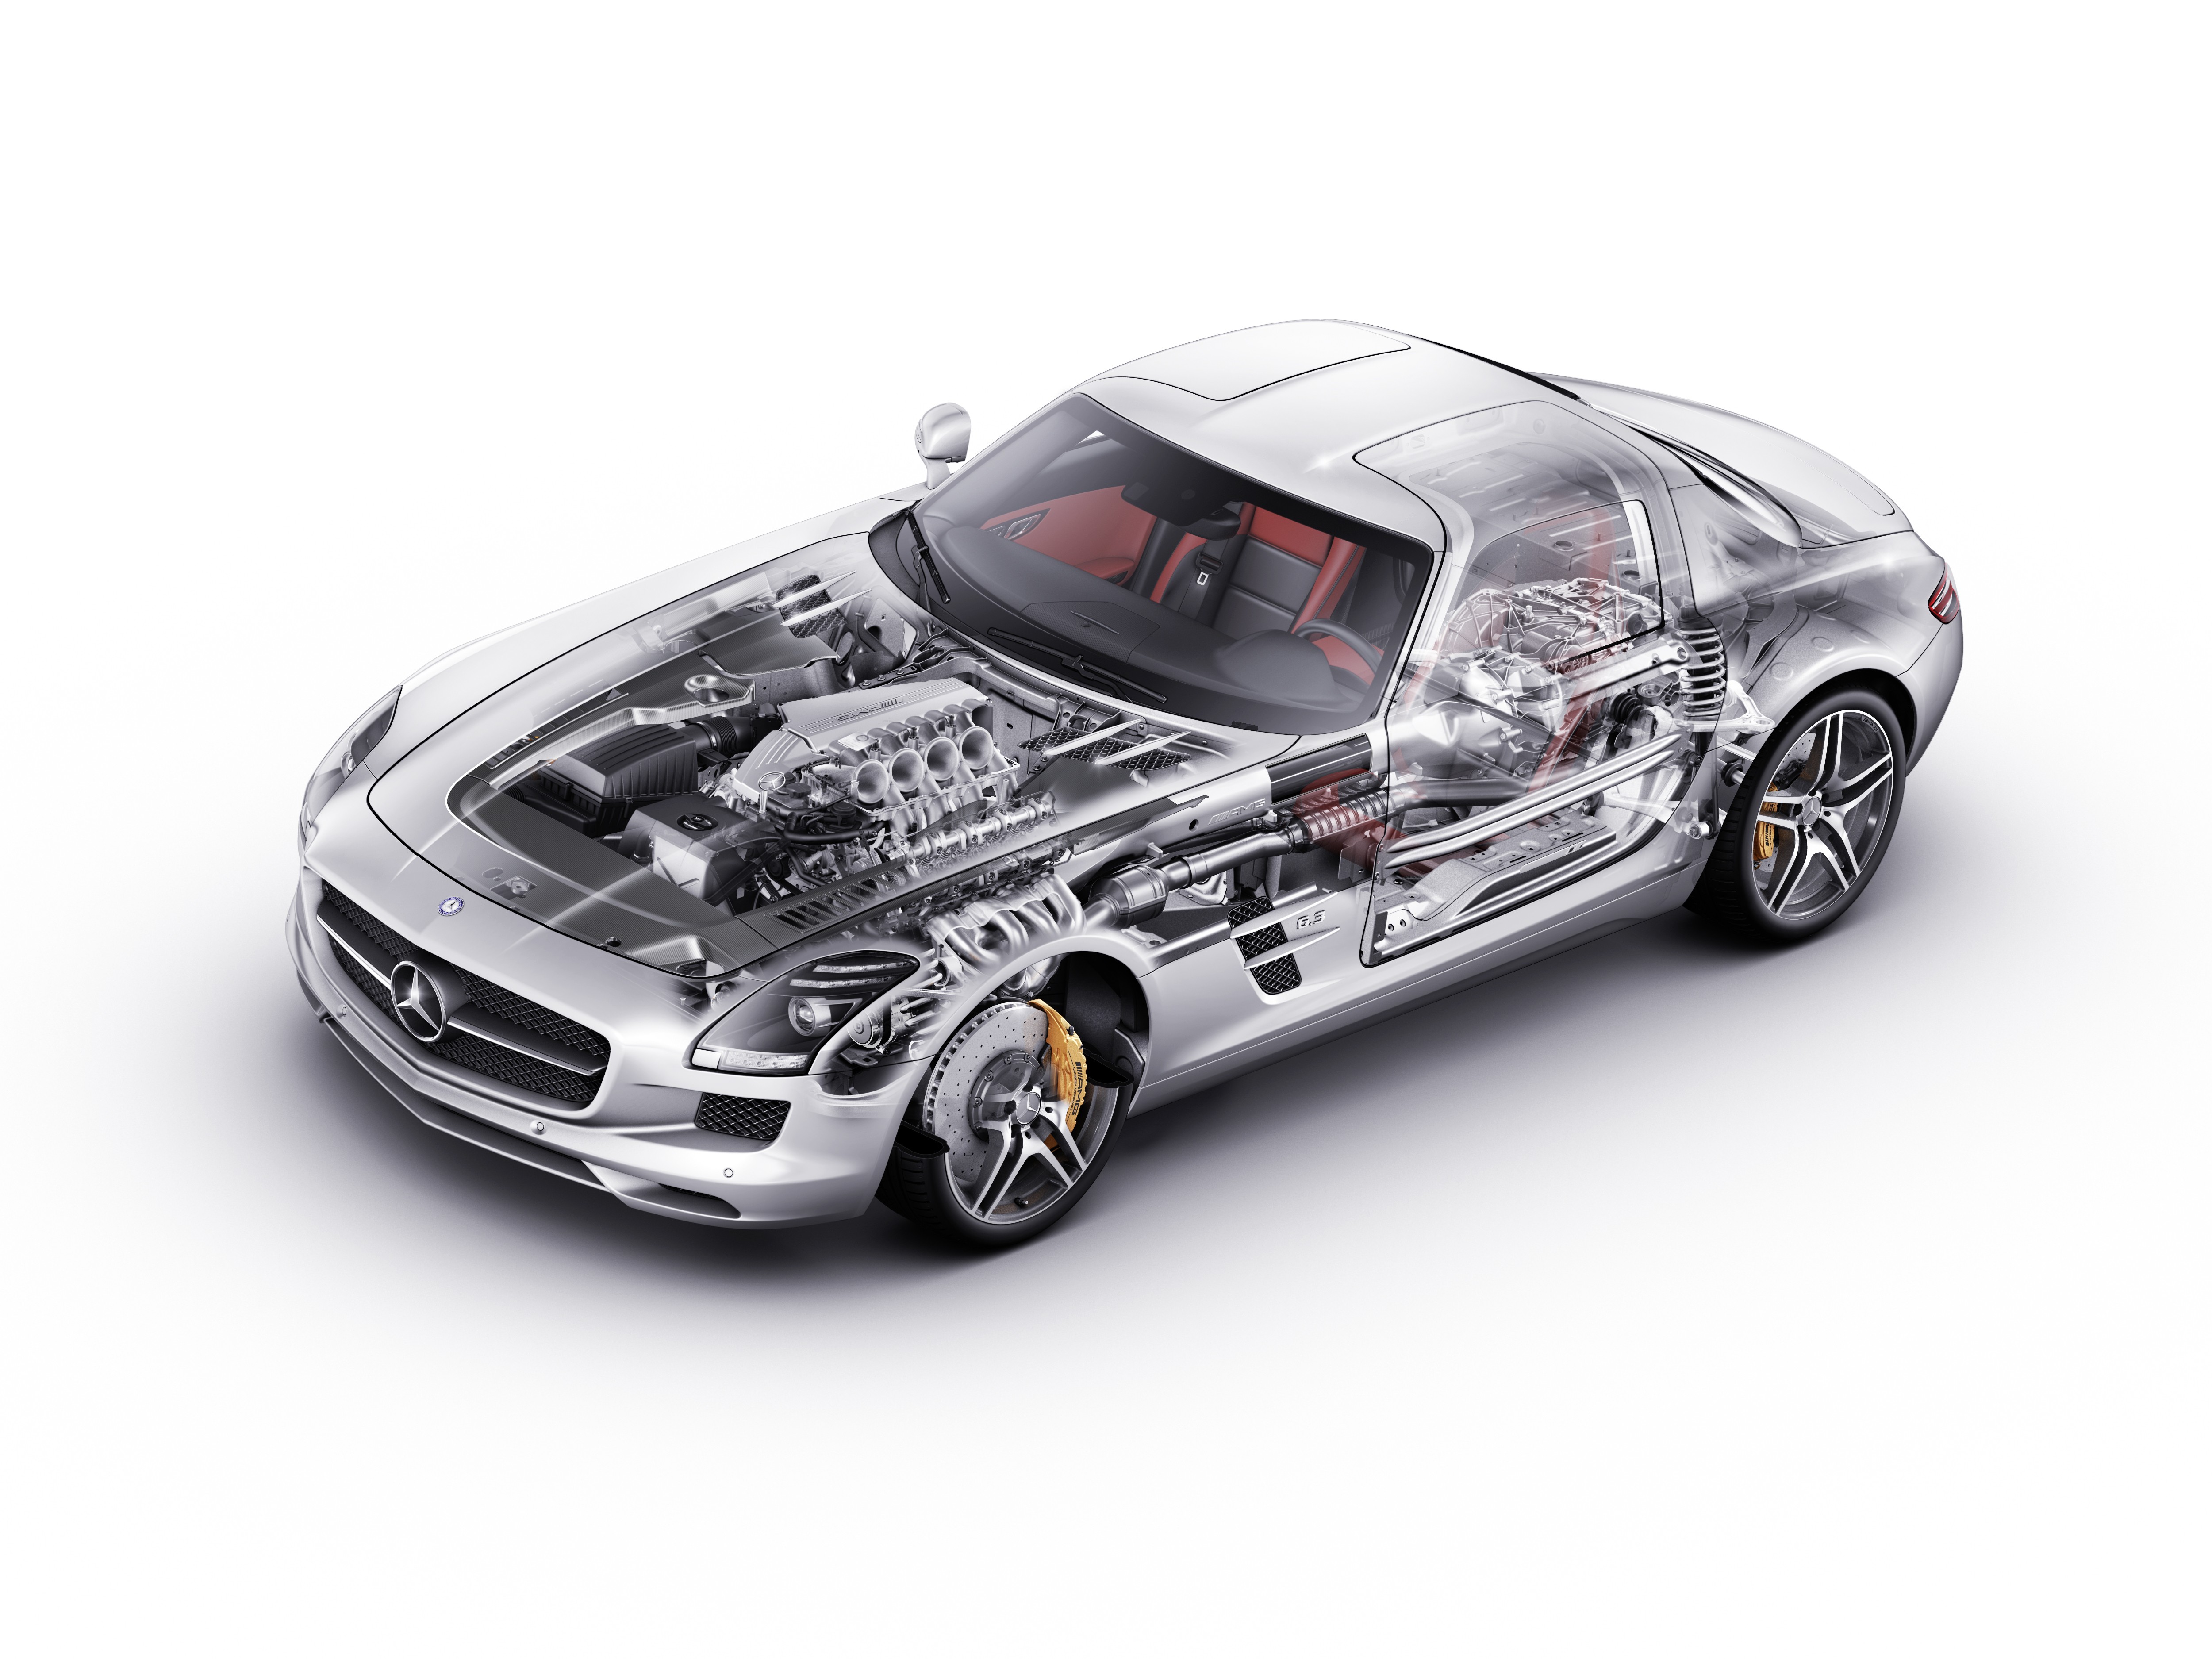 General 5000x3750 car vehicle Roadster Mercedes-Benz SLS AMG white background engine technology transparency sports car high angle Mercedes-Benz cutaway car parts silver cars blueprints simple background CGI digital art